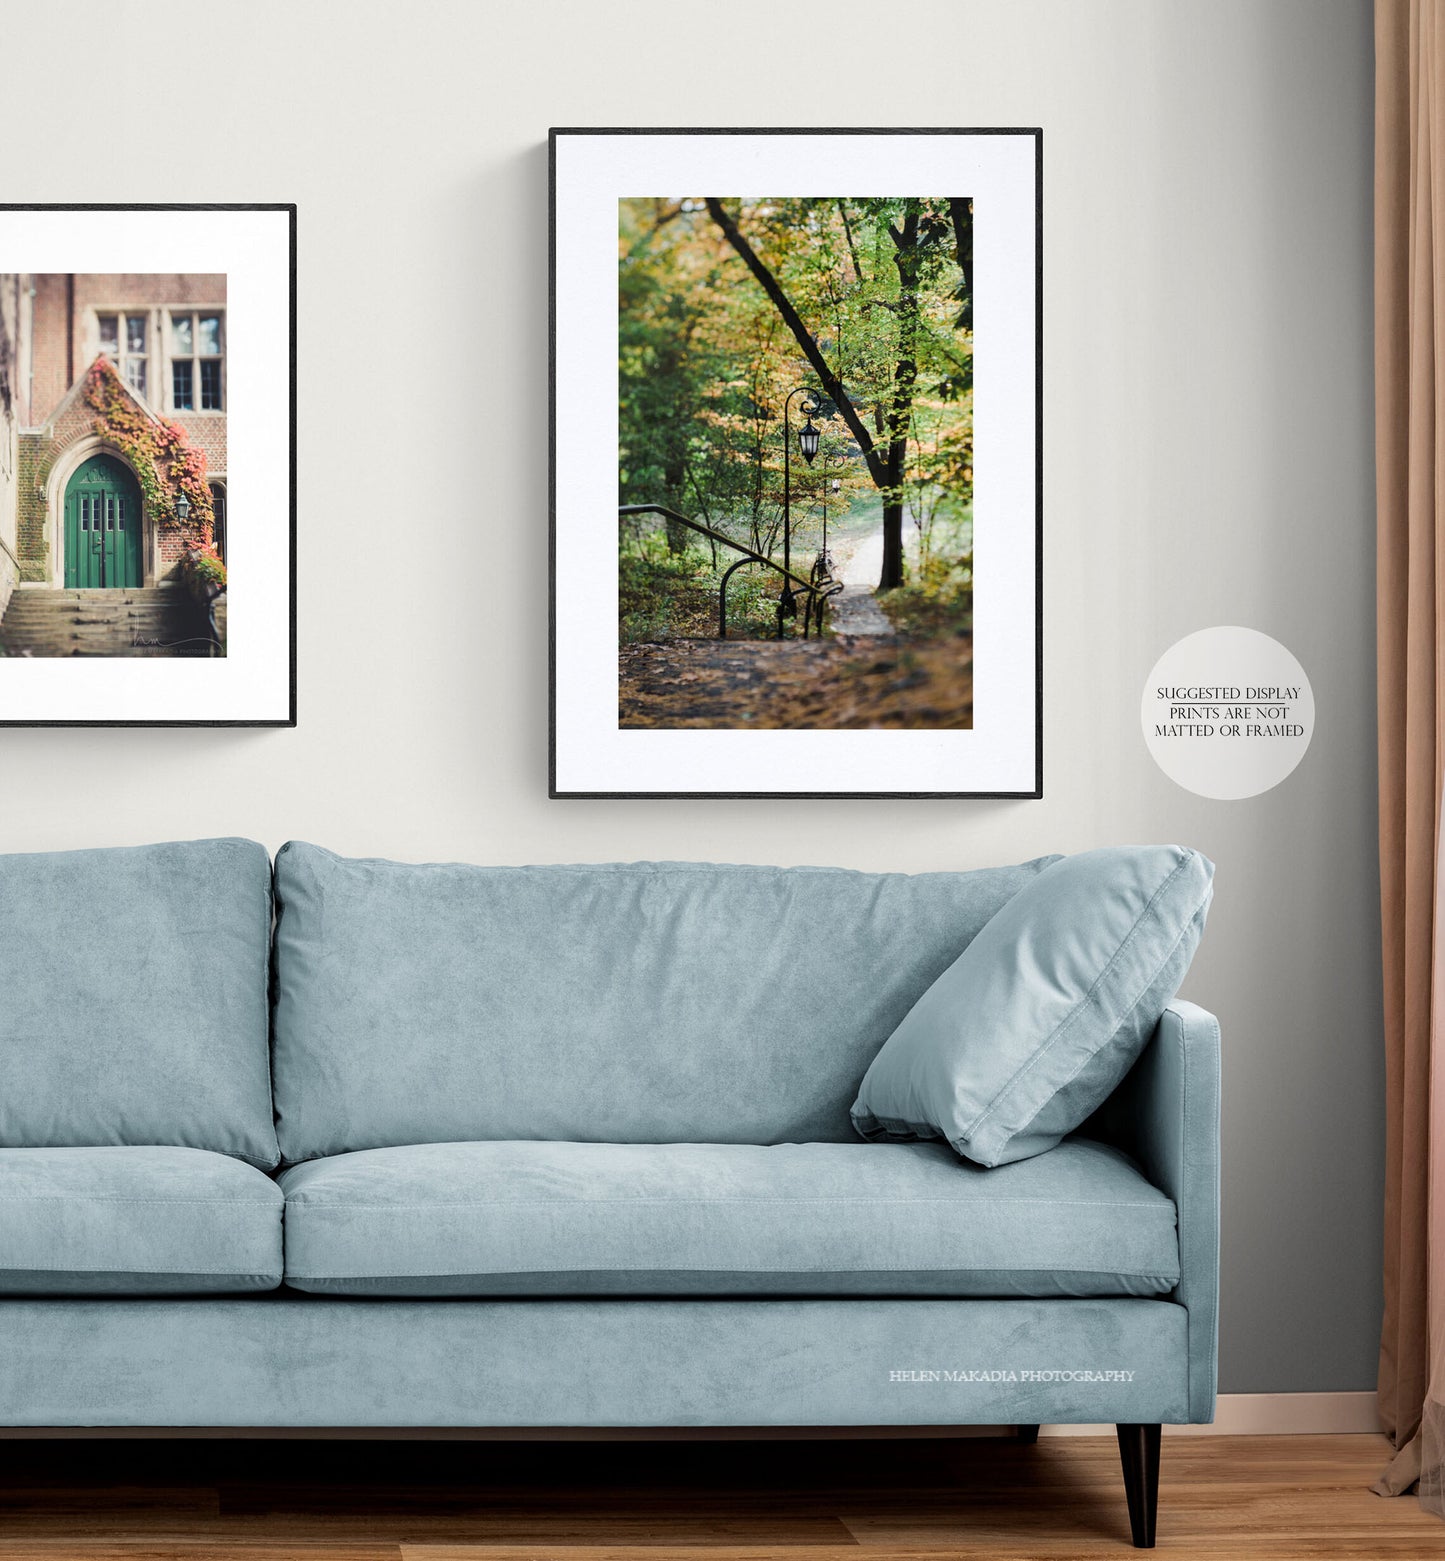 Framed print of Staircase and path at Wellesley College, in a living room.